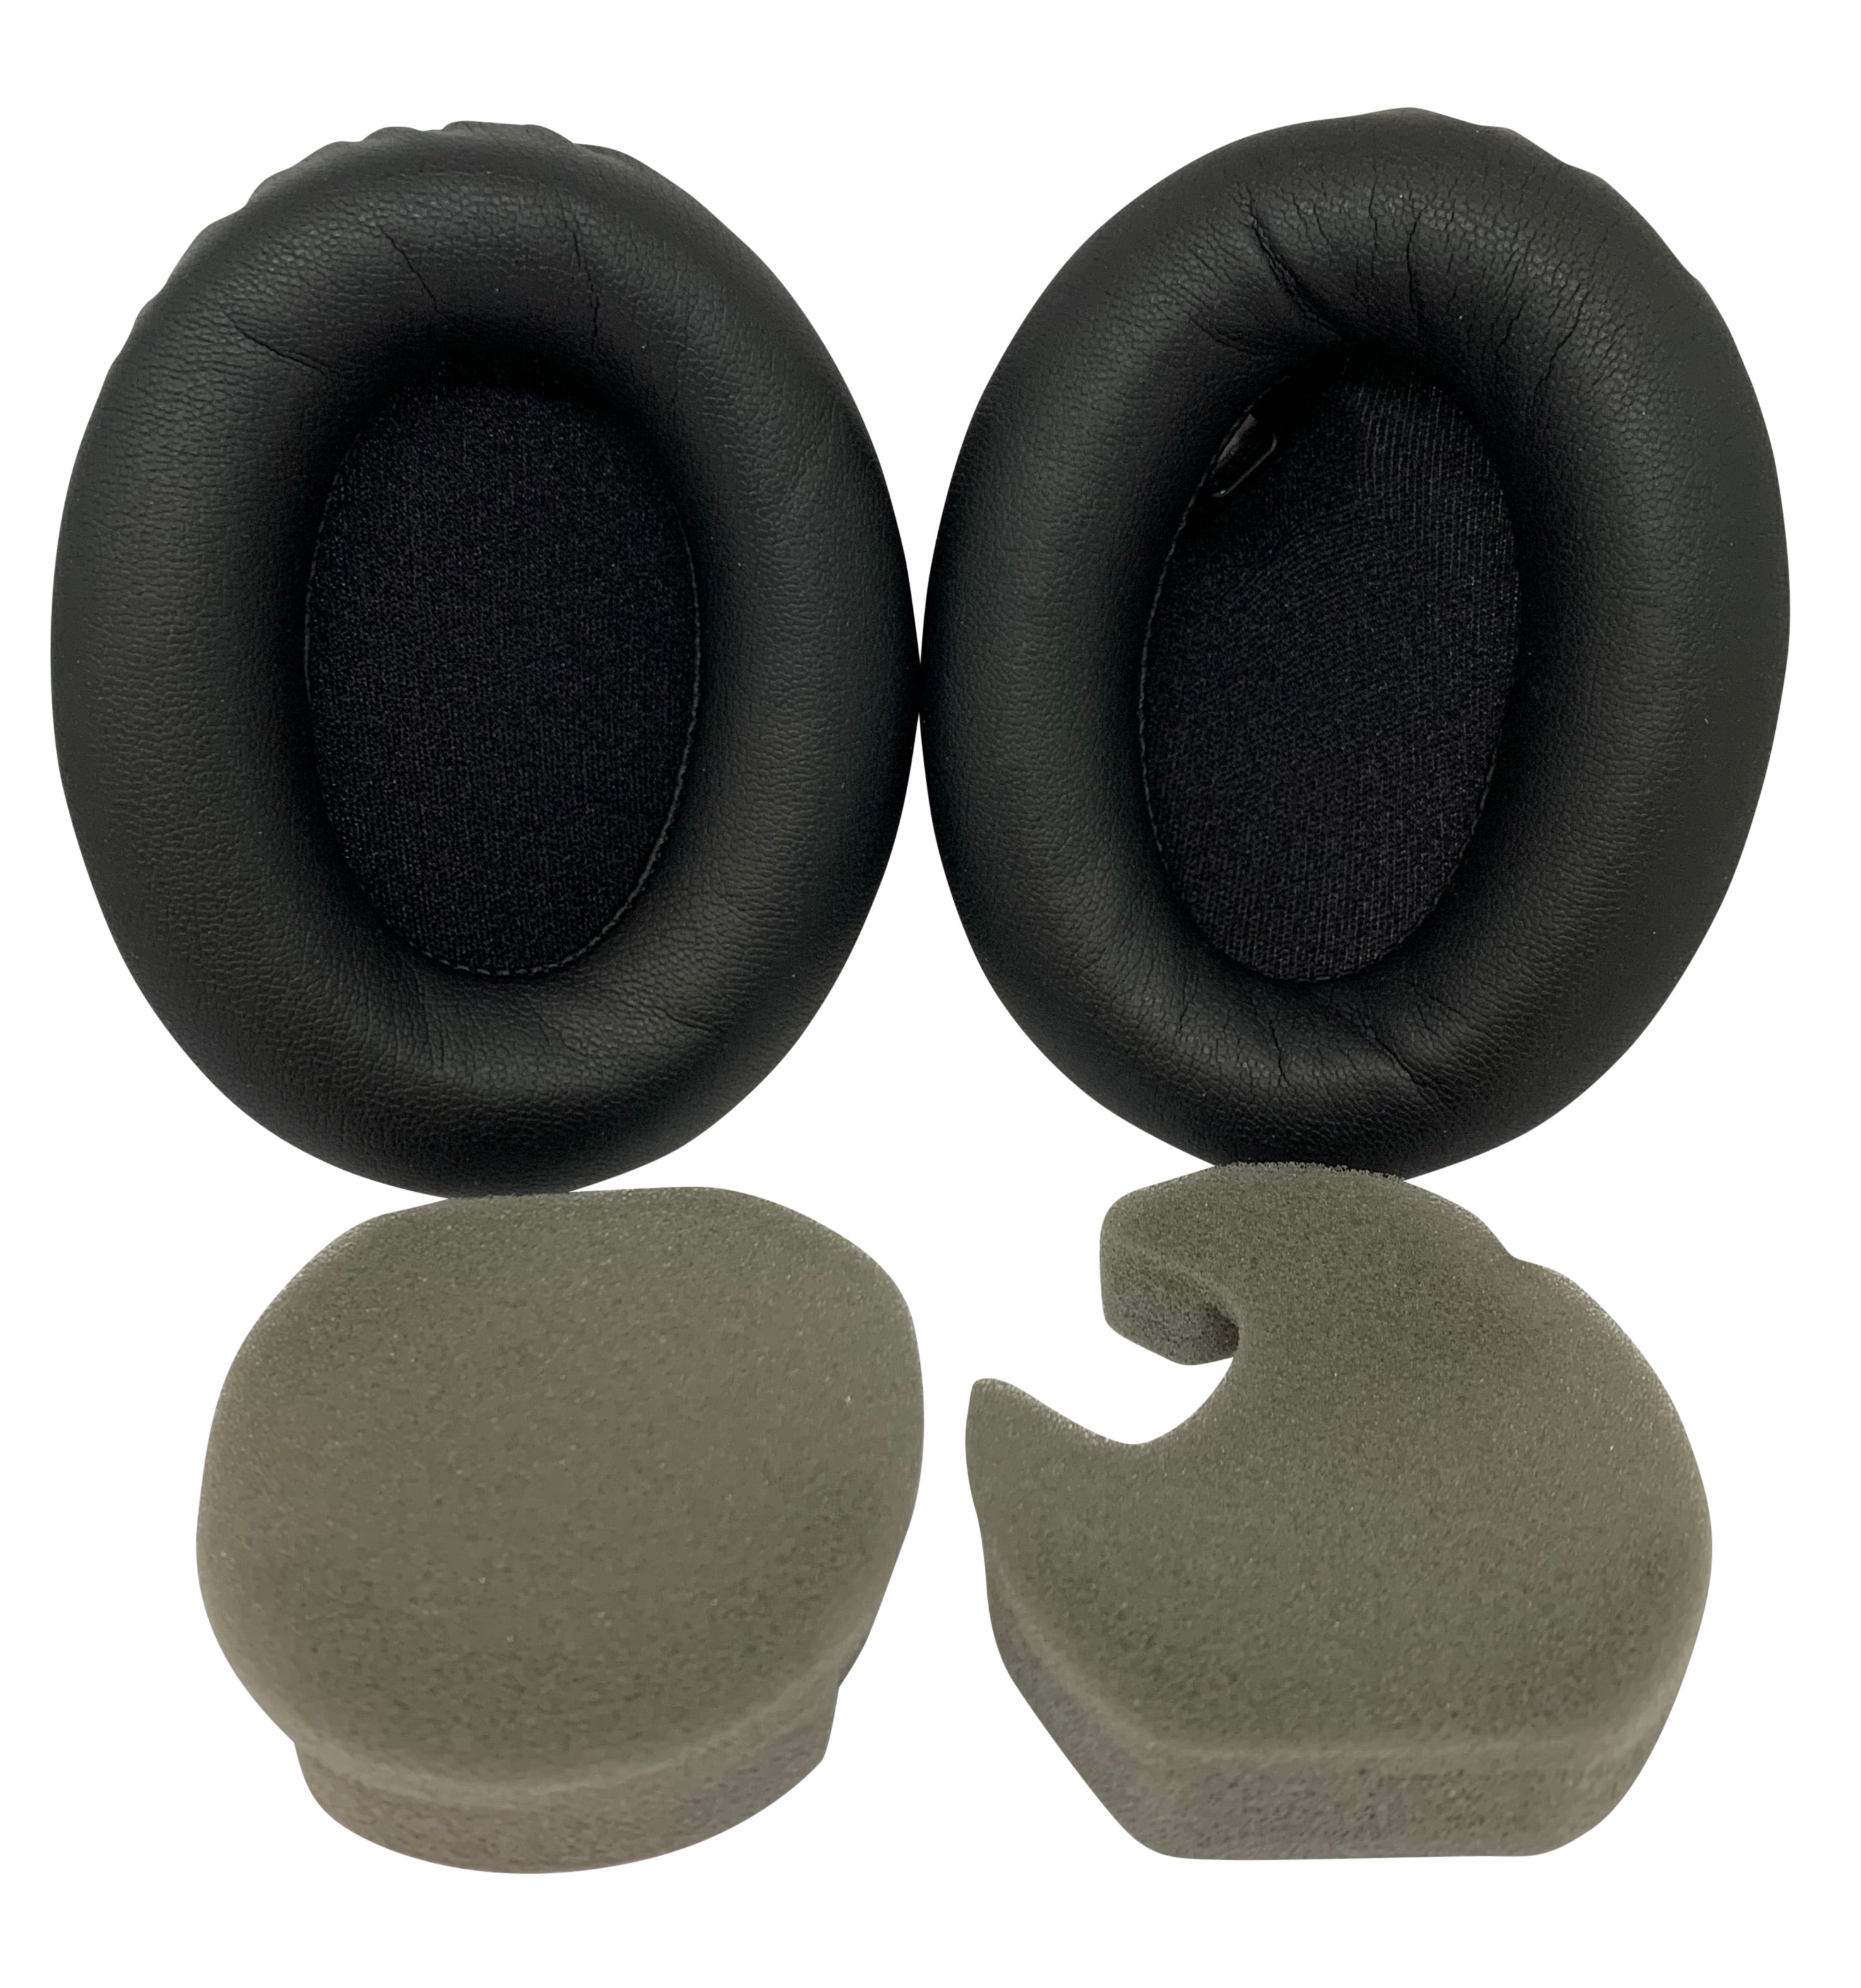 CentralSound Replacement Ear Pad Cushions for Sony WH-1000XM4 WH1000XM